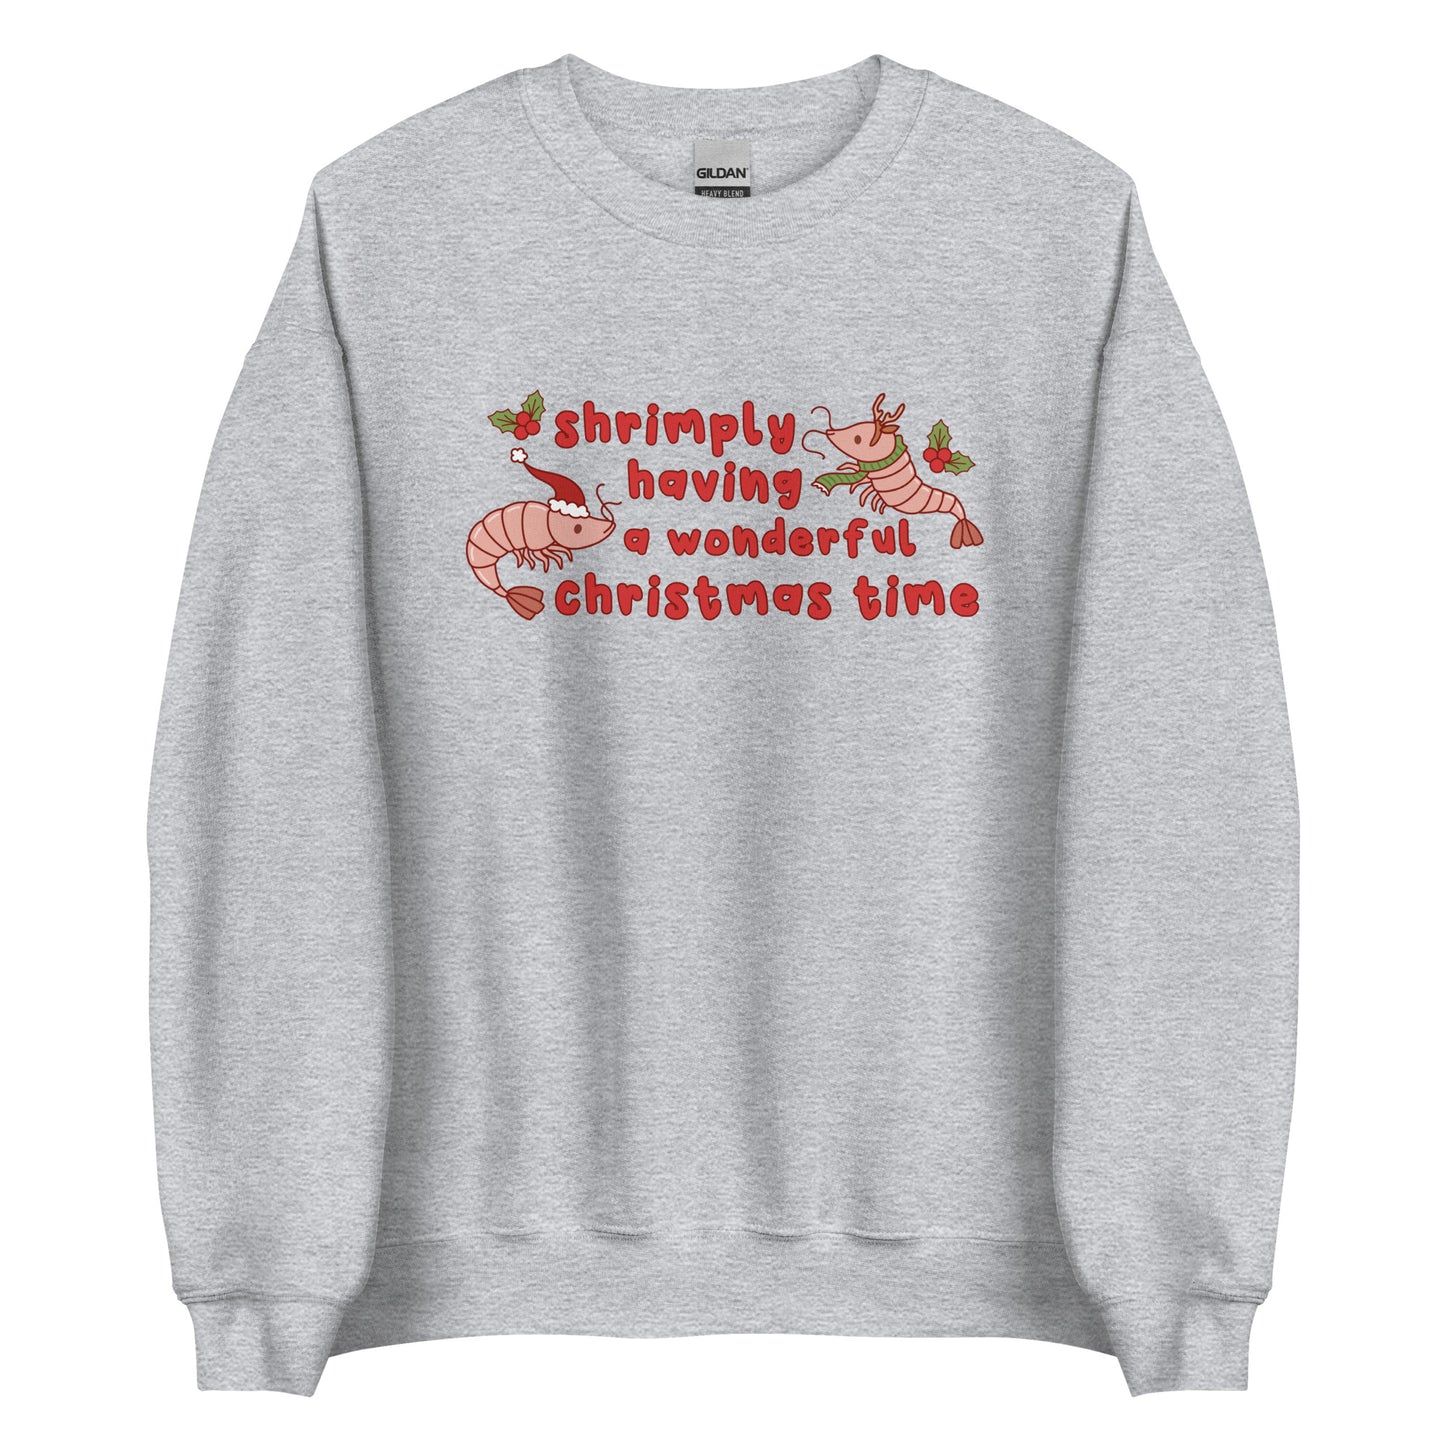 A grey crewneck sweatshirt featuring an illustration of two festive shrimp - one with a Santa hat, and one with reindeer antlers. Text between the shrimp reads "shrimply having a wonderful Christmas time".